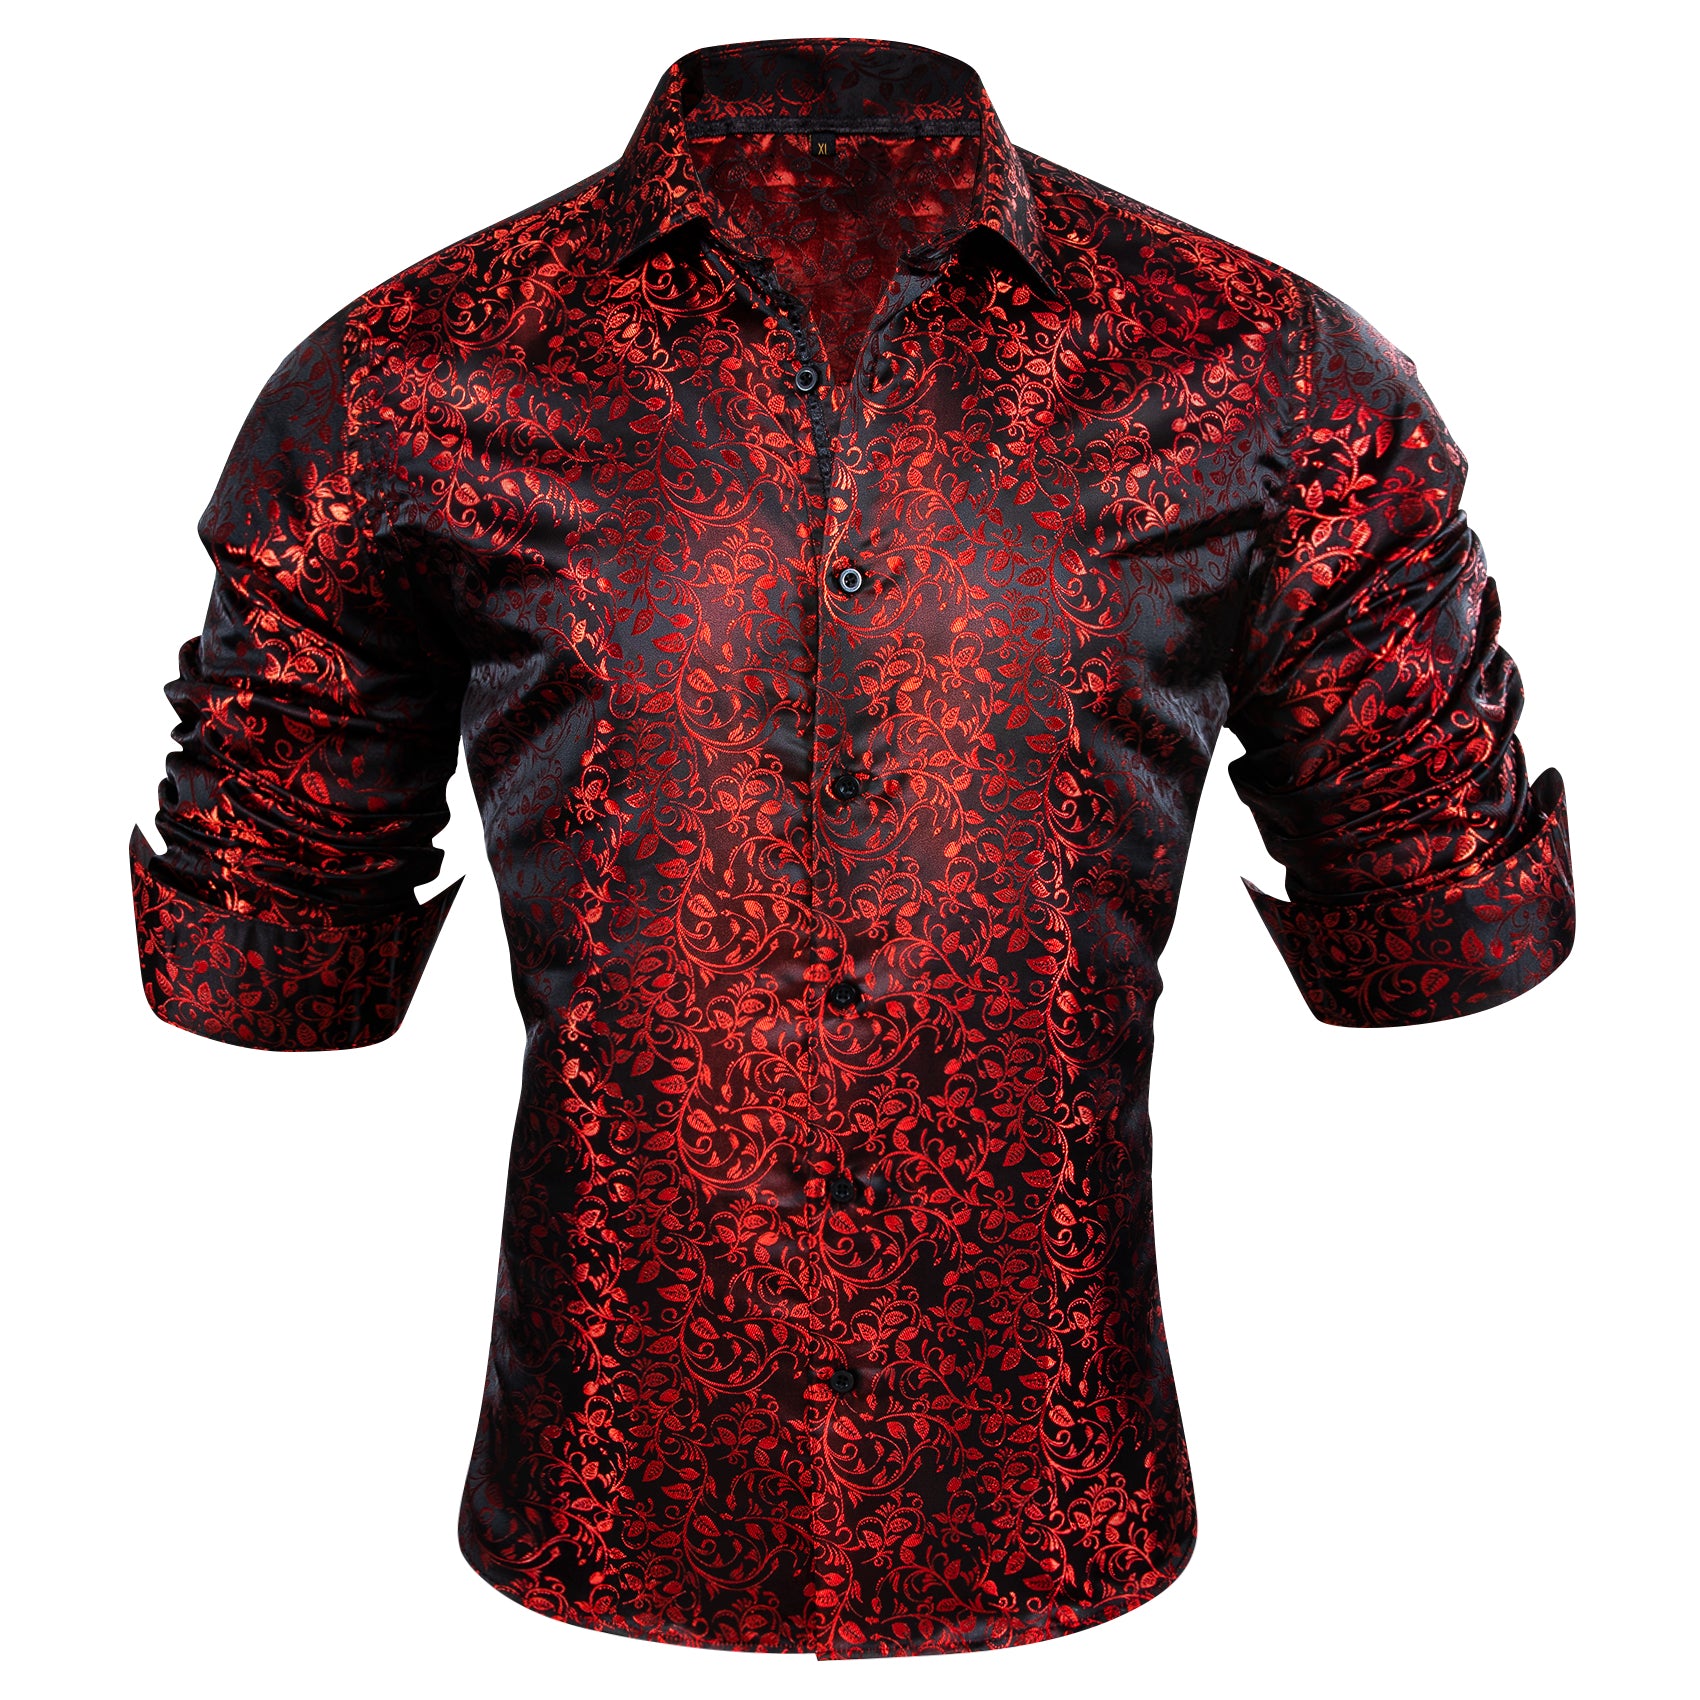 Barry.wang Button Down Shirt Luxury Burgundy Red Leaves Floral Silk Shirt for Men